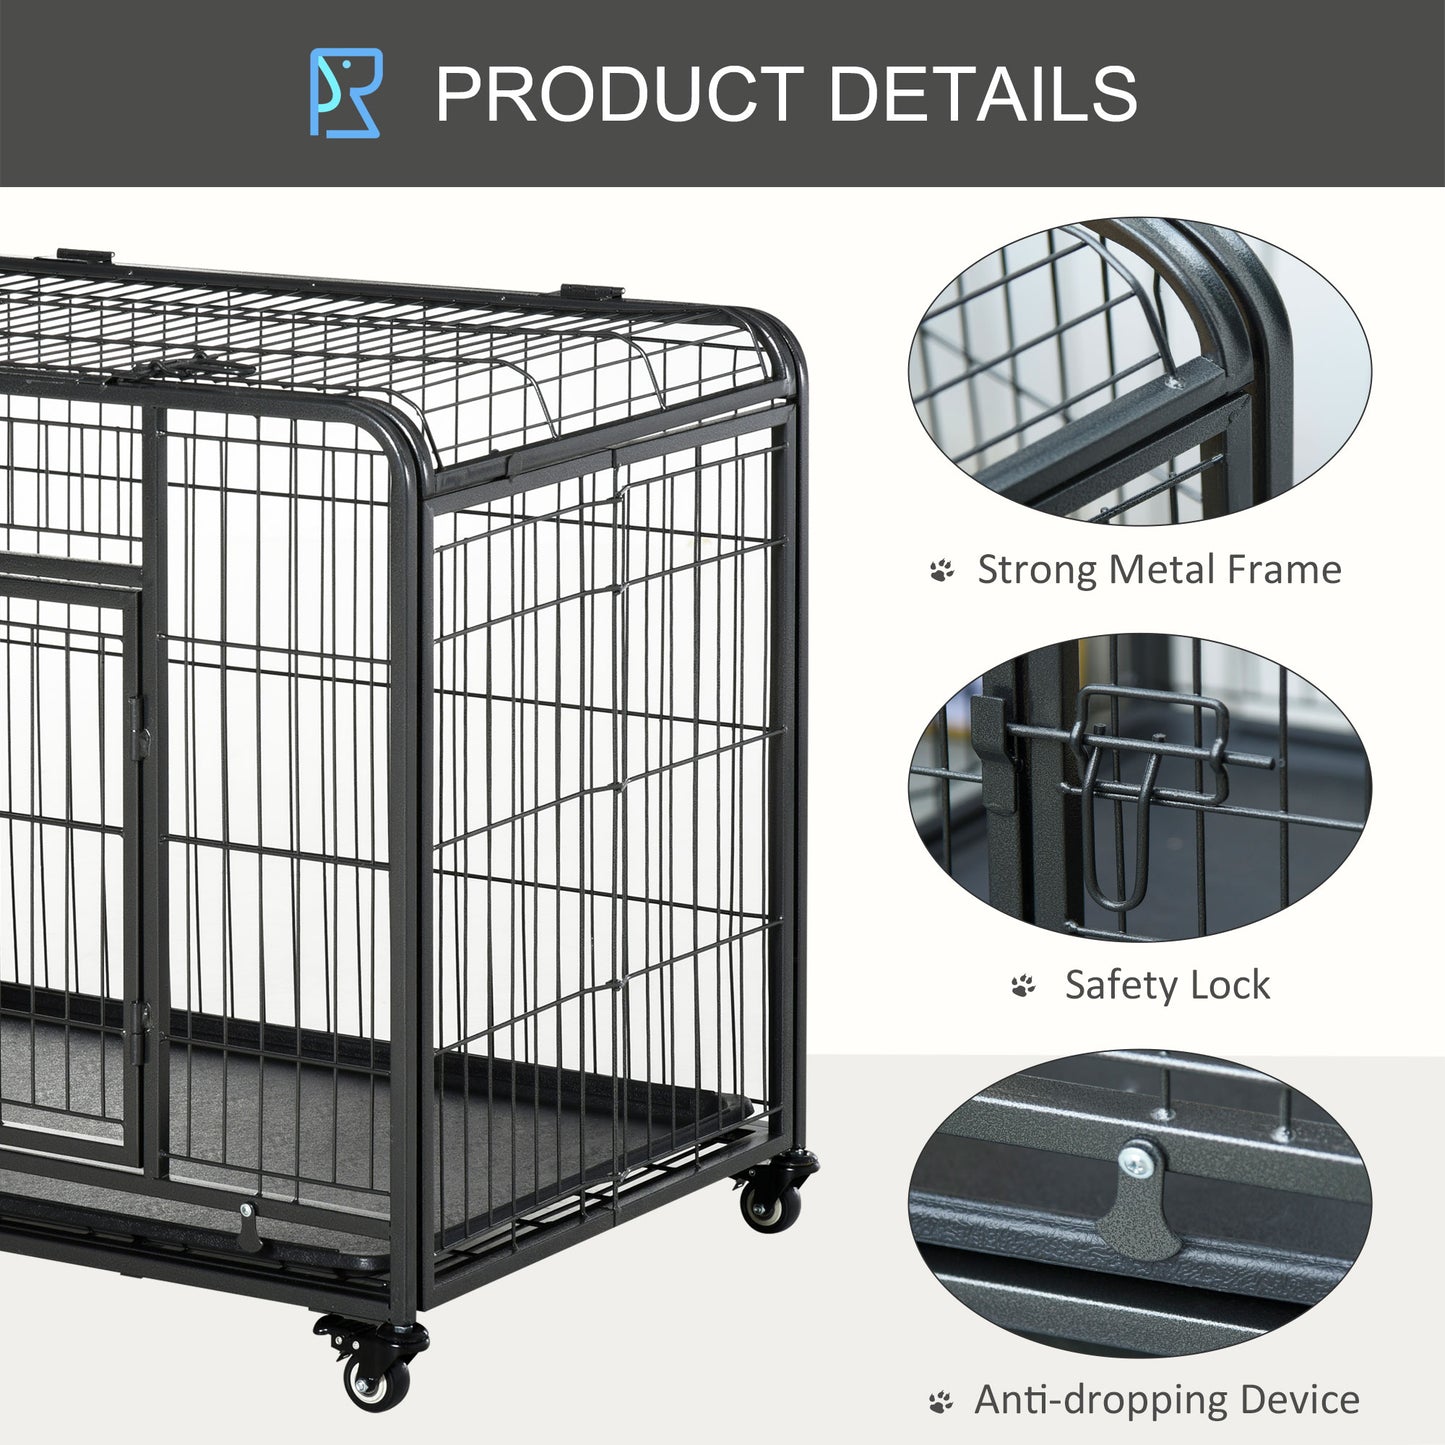 PawHut Dog Crates Foldable Indoor Dog Kennel & Dog Cage Pet Playpen w/ Tray Lockable Wheels Openable Top